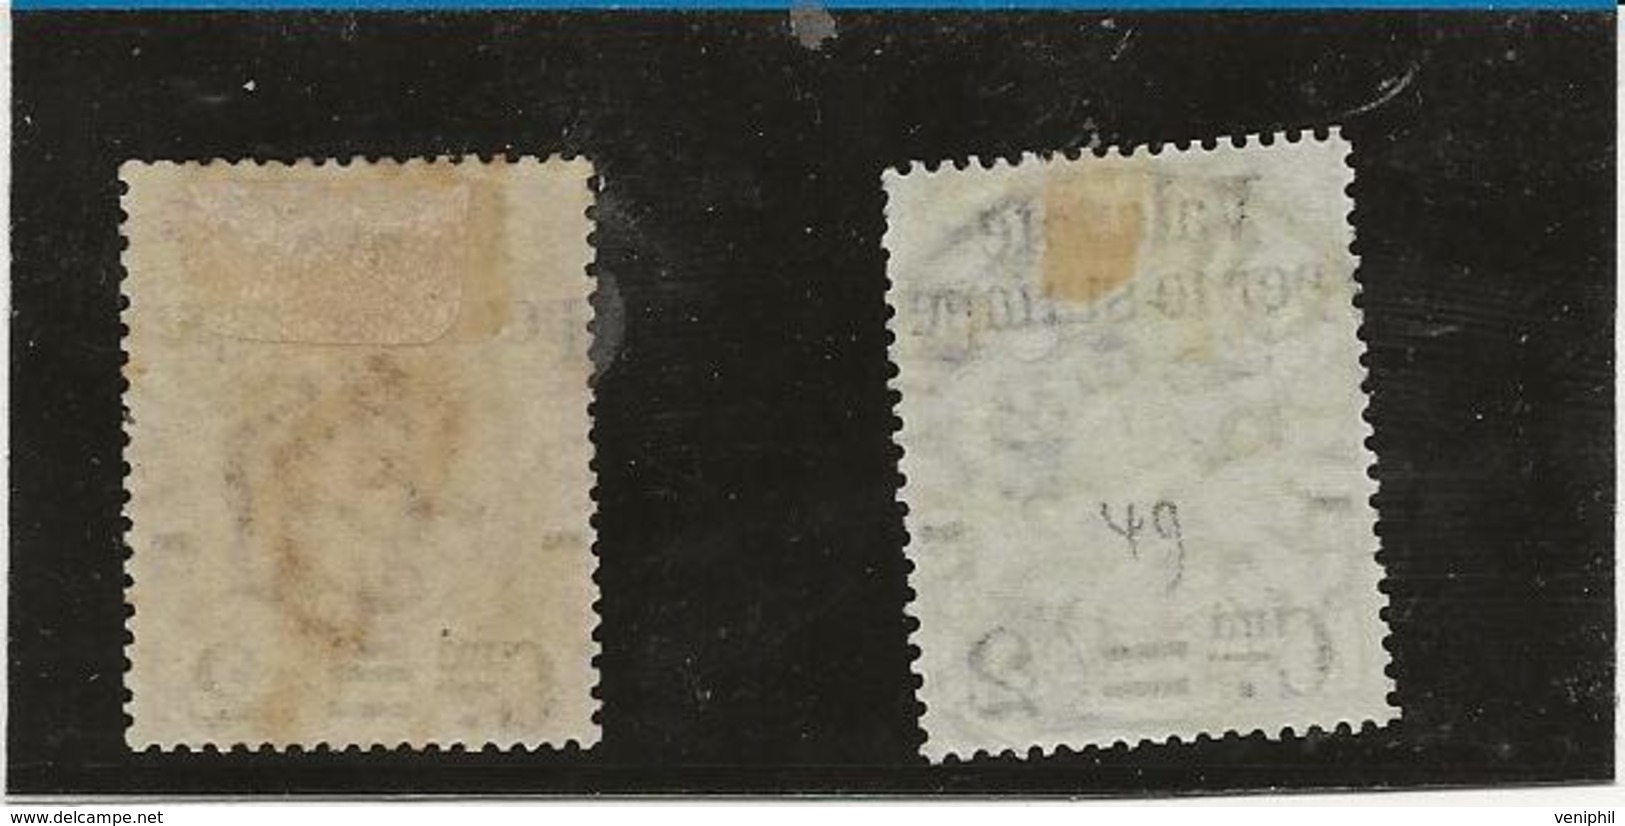 TIMBRES N° 48 NEUF S GOMME + N° 49 OBLITERE - ANNEE 1890 - COTE : 40 € - Usati